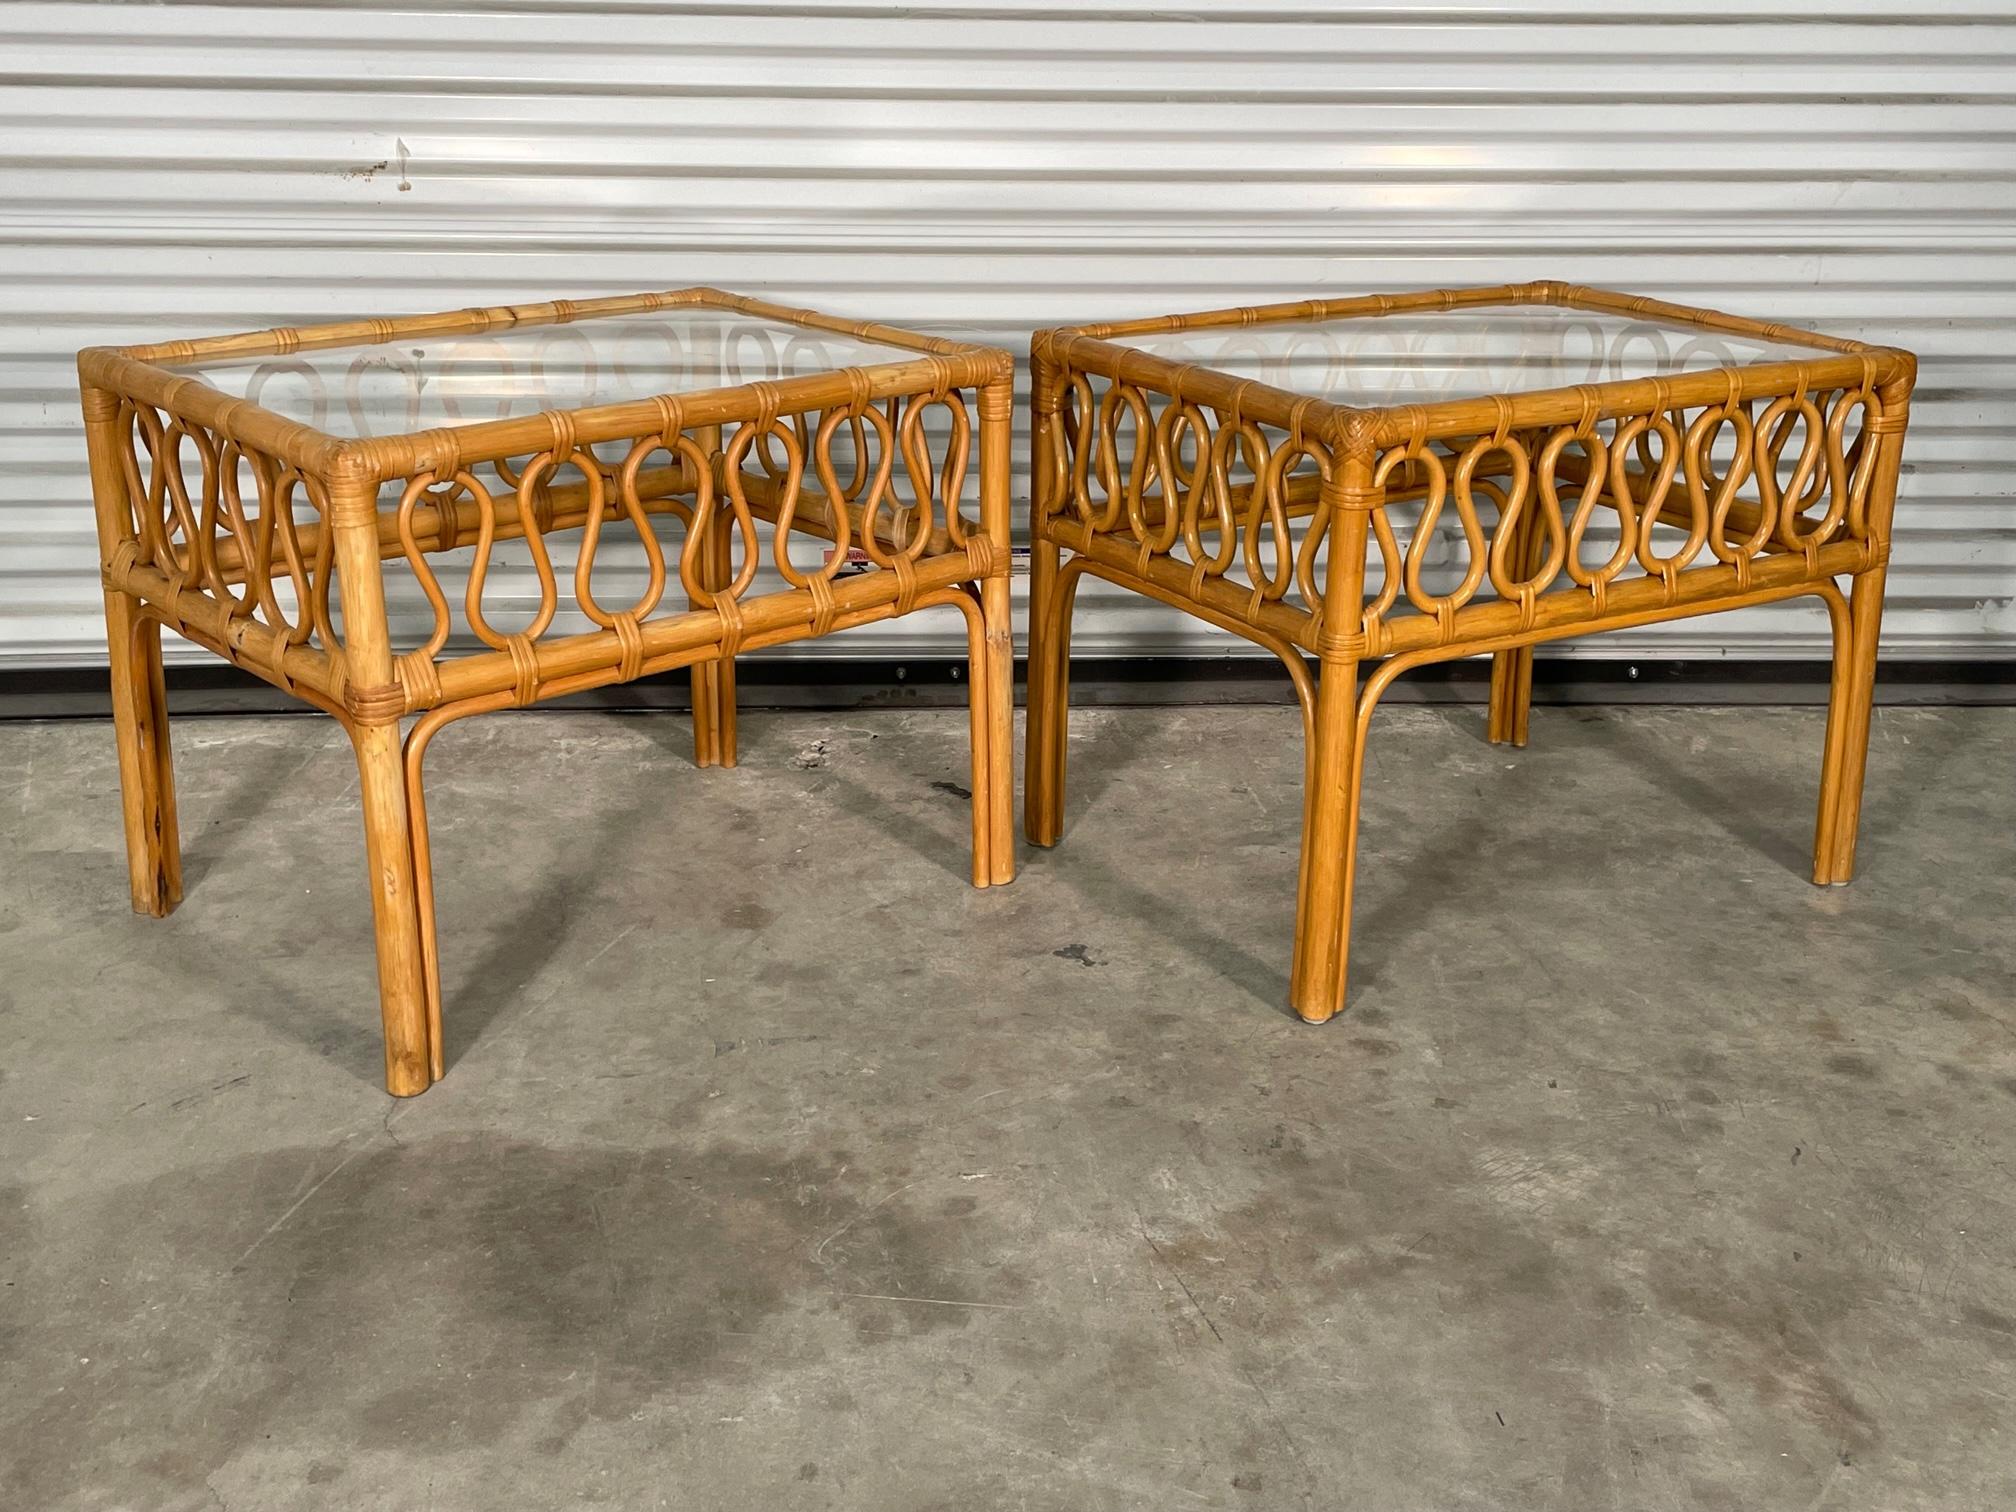 Pair of vintage rattan side tables feature a unique loop style fretwork and glass tops. Marked 